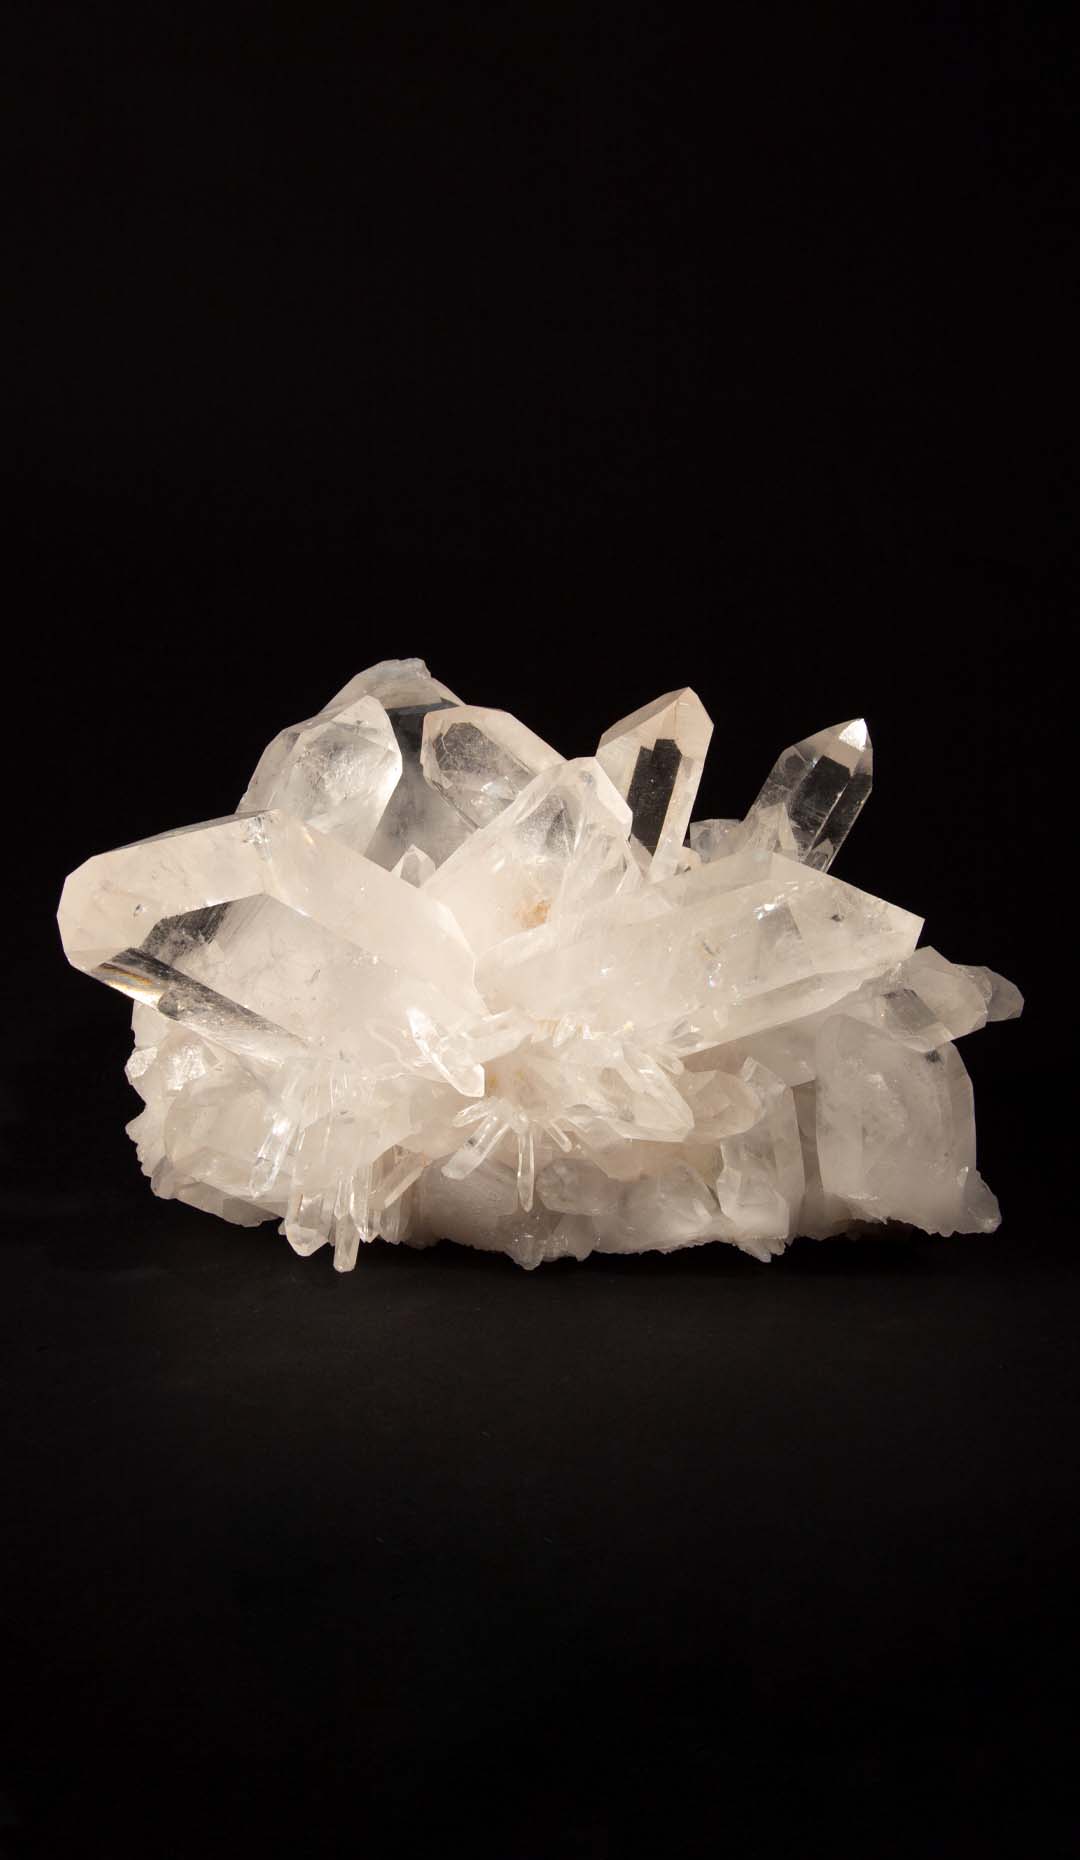 Table Mounted Rock Crystal Cluster